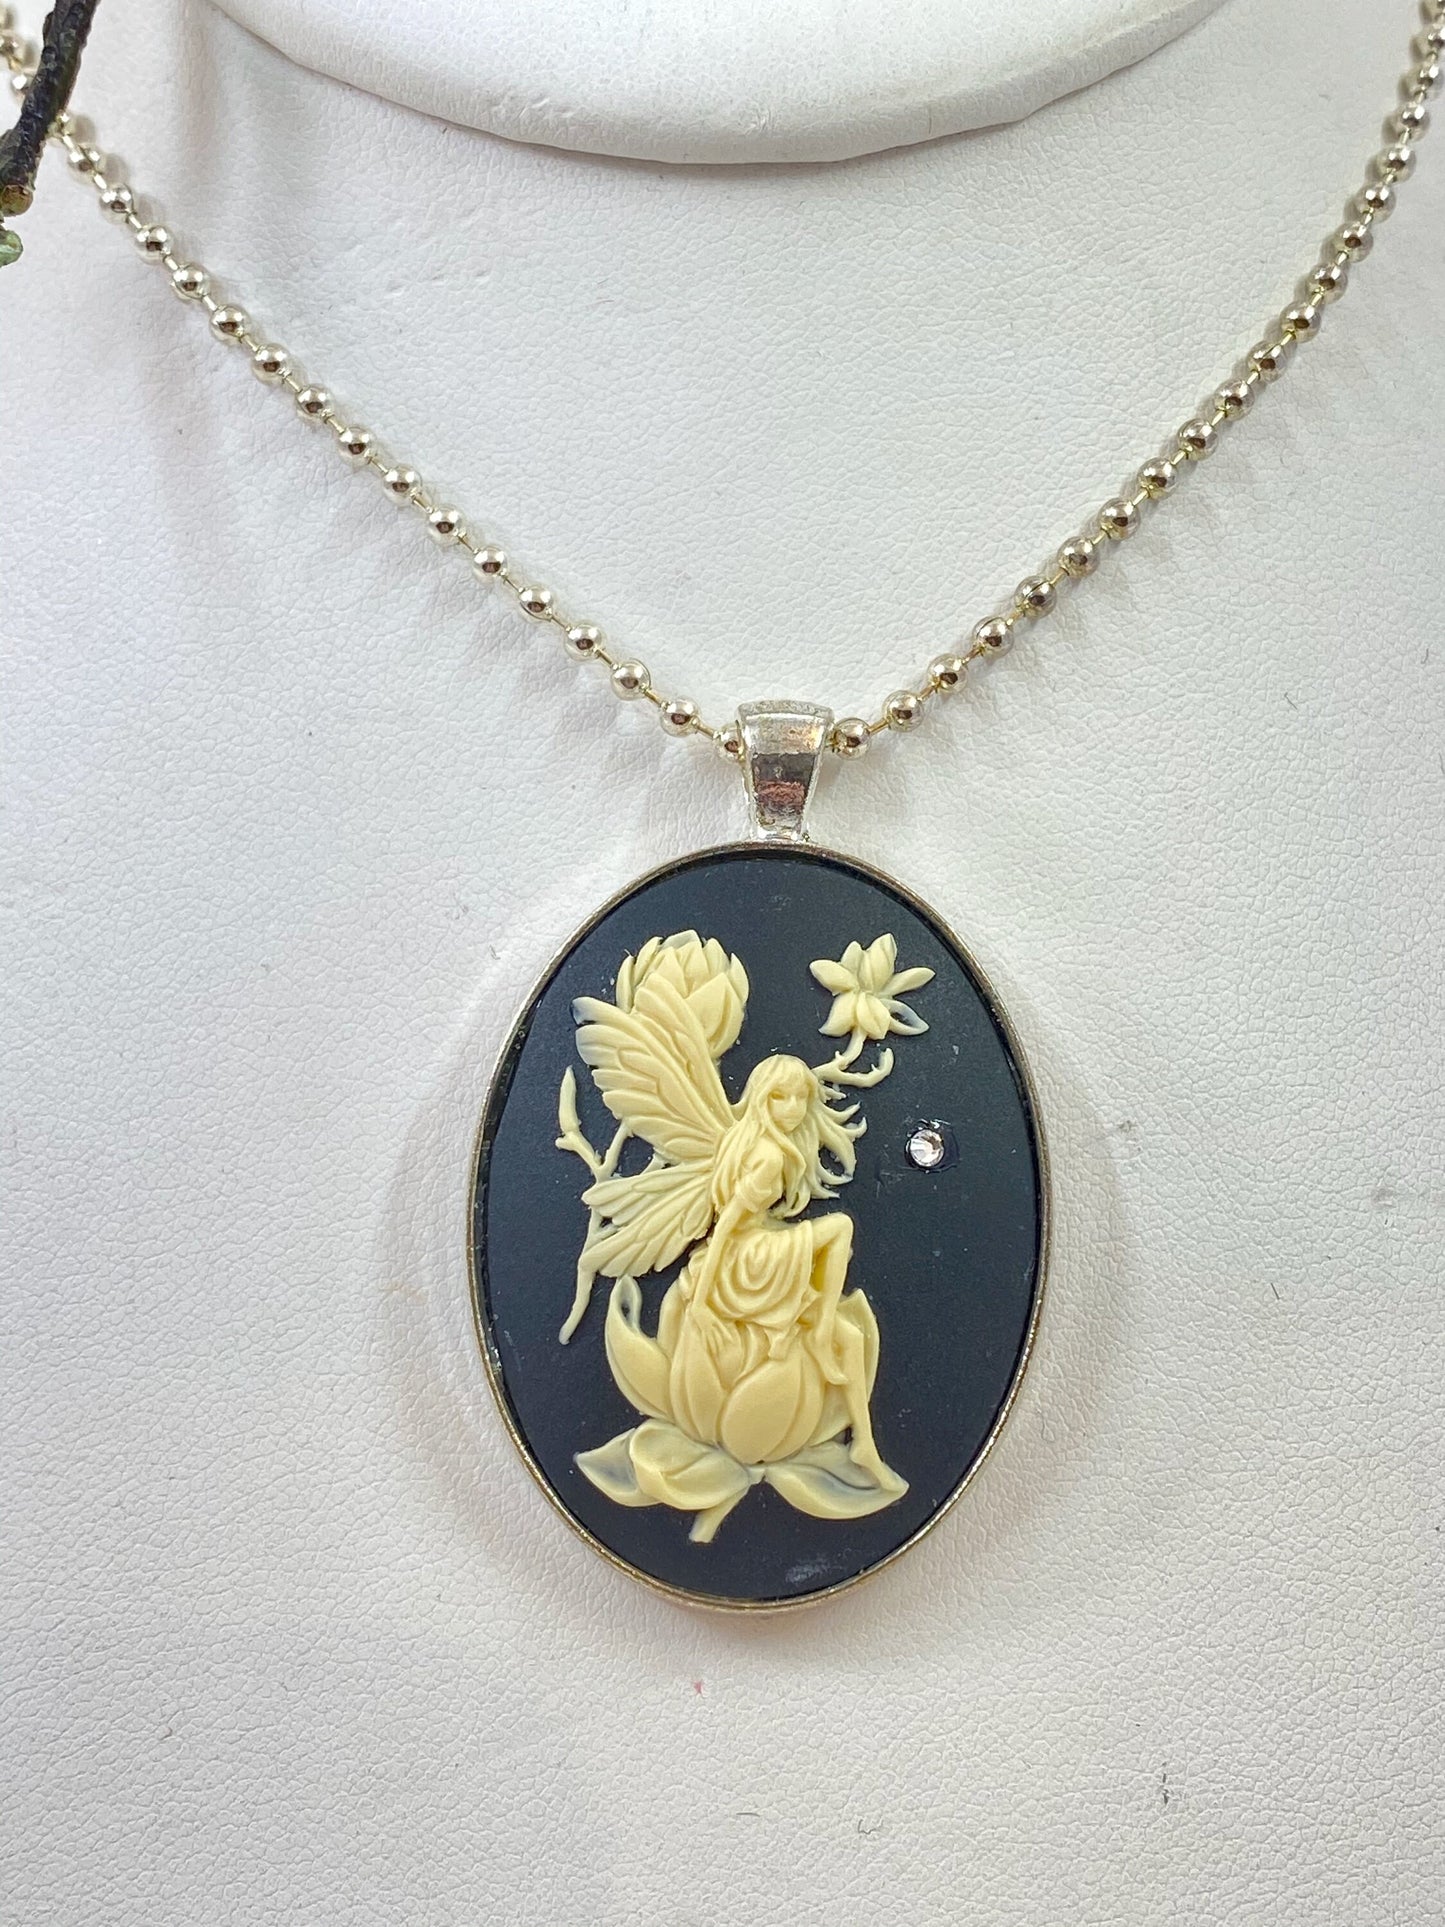 Equisite angel cameo pendant. Set in a silver bezel with a crystal star. Strung on a sterling silver chain.